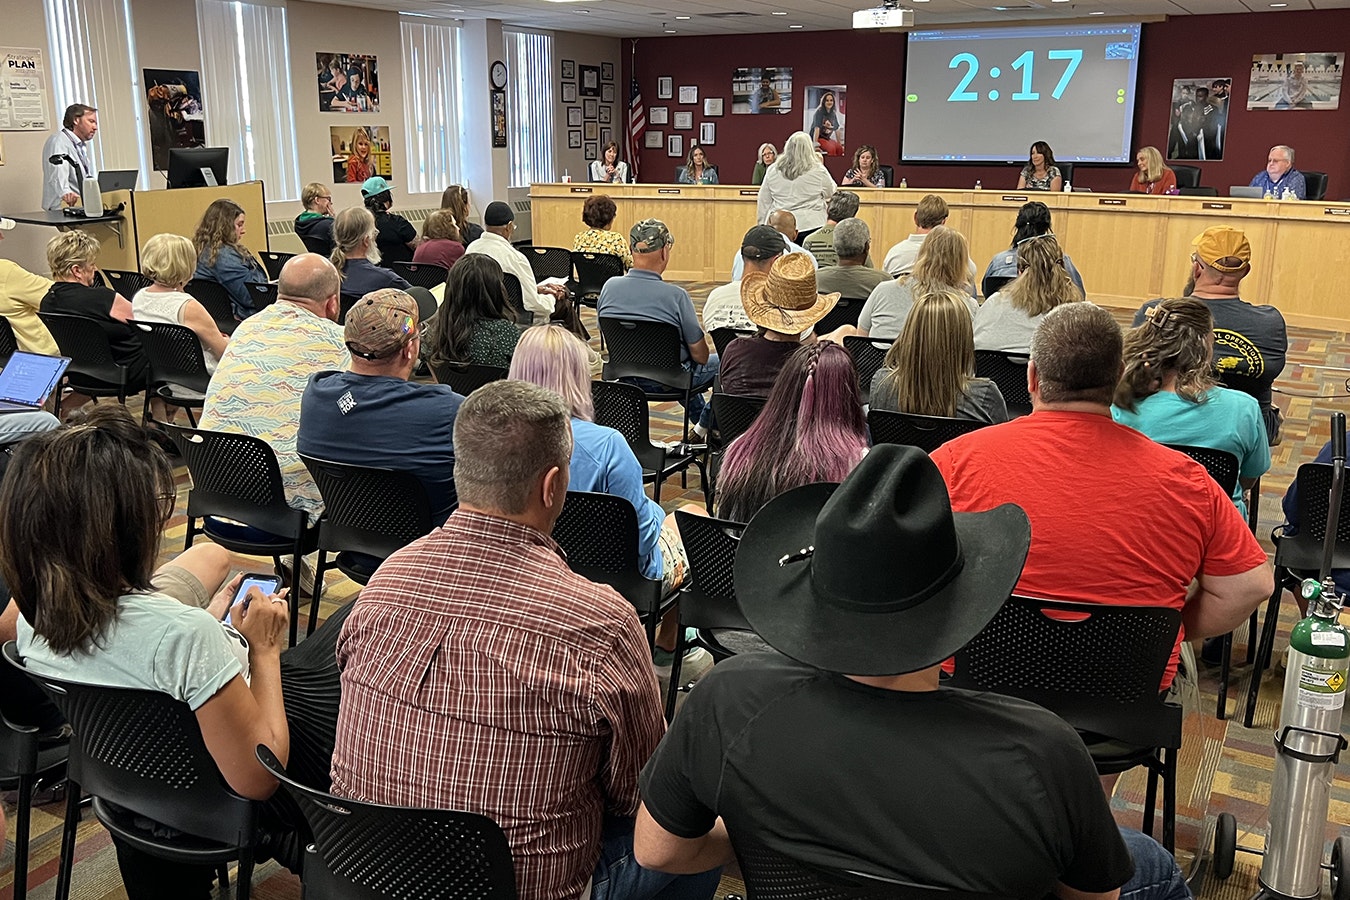 The Wyoming Regulatory Reduction Task Force is looking into reports that some people are afraid to voice public criticism of governmental entities out of fear of retaliation. Many people do participate, like in this recent Laramie County School District 1 board meeting, but task force members say others report they don't feel comfortable speaking honestly about issue.